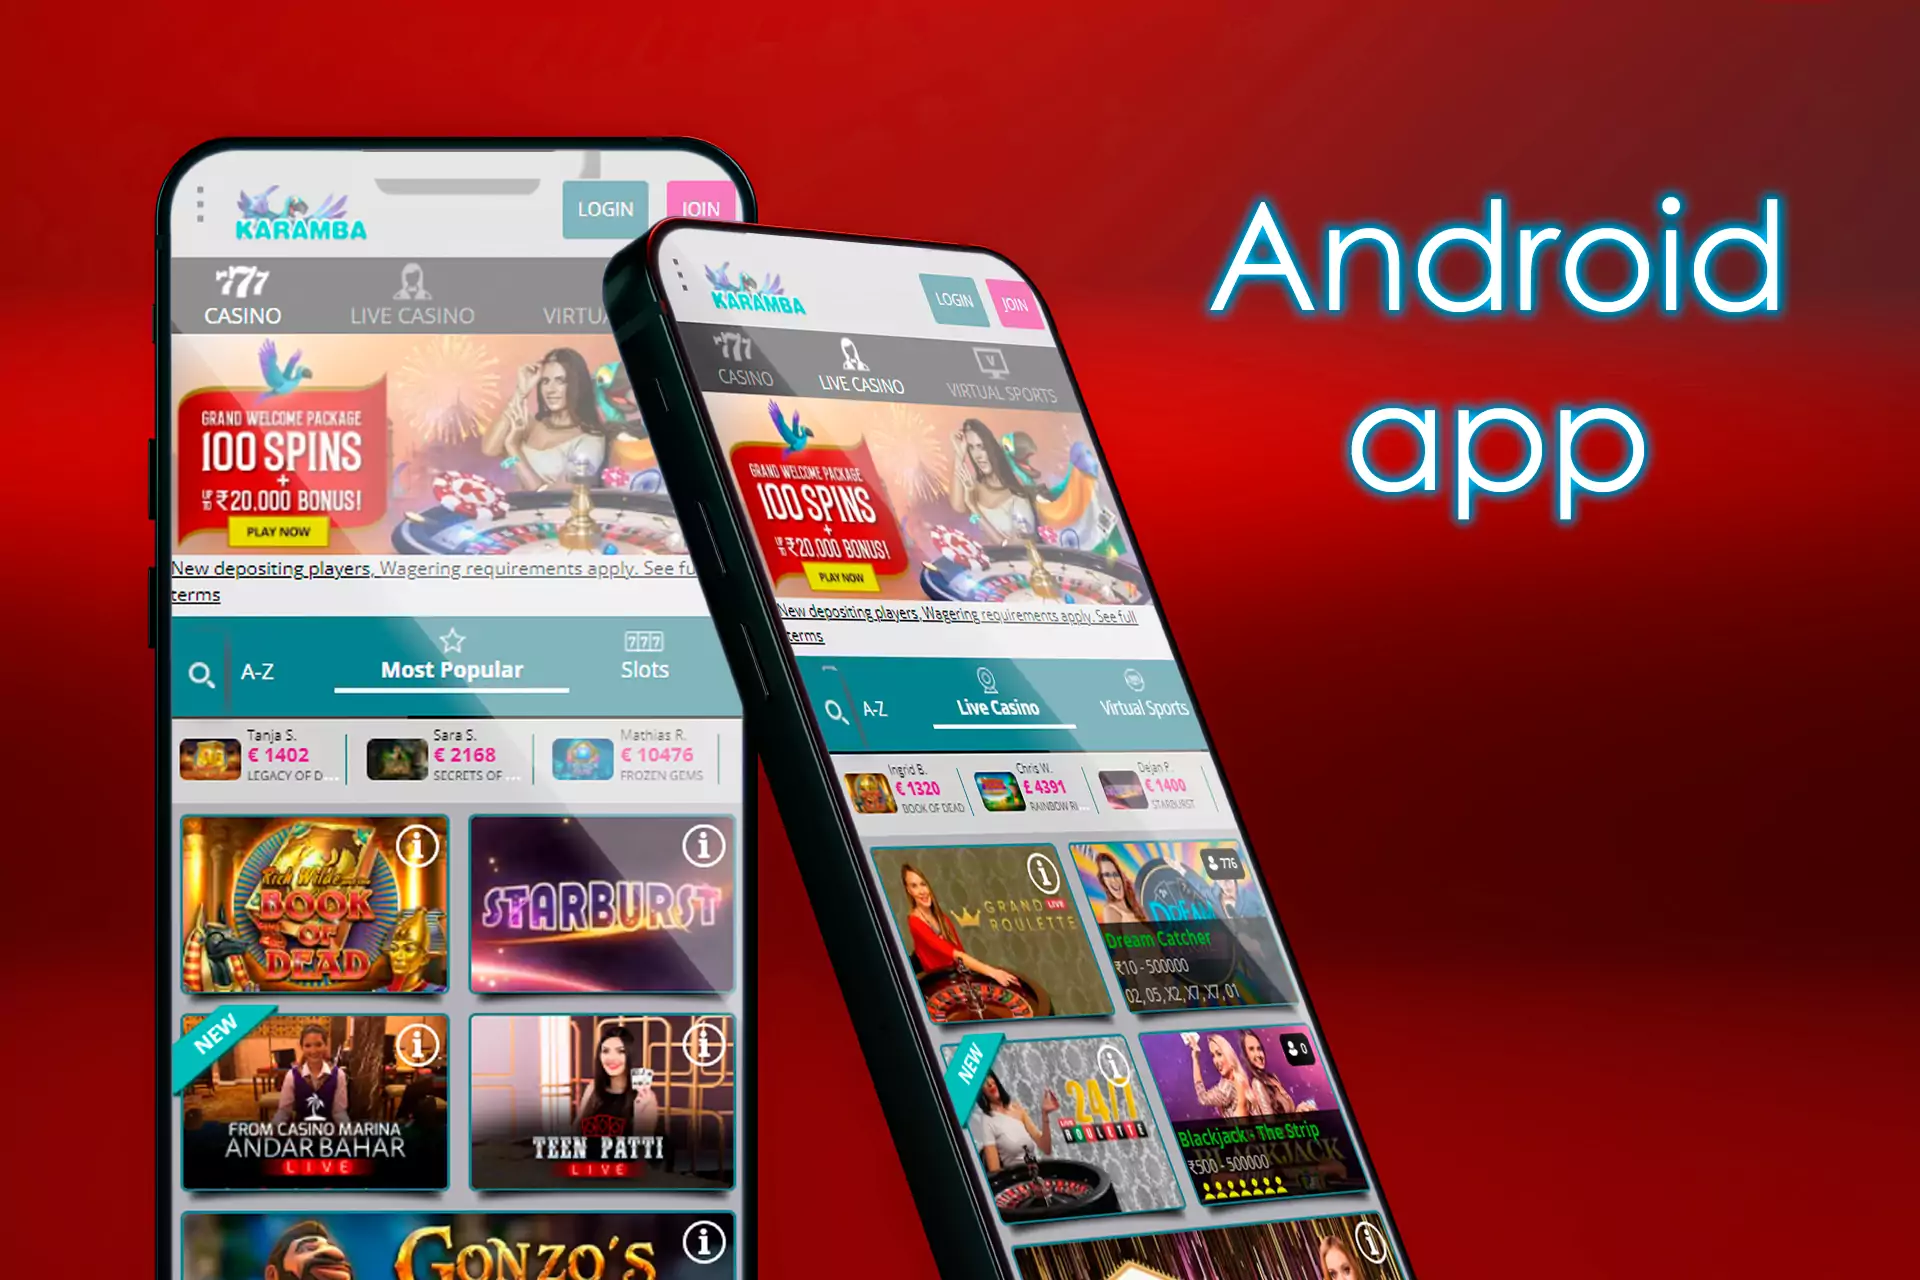 Smartphone users can download and install the Android app of Karamba.